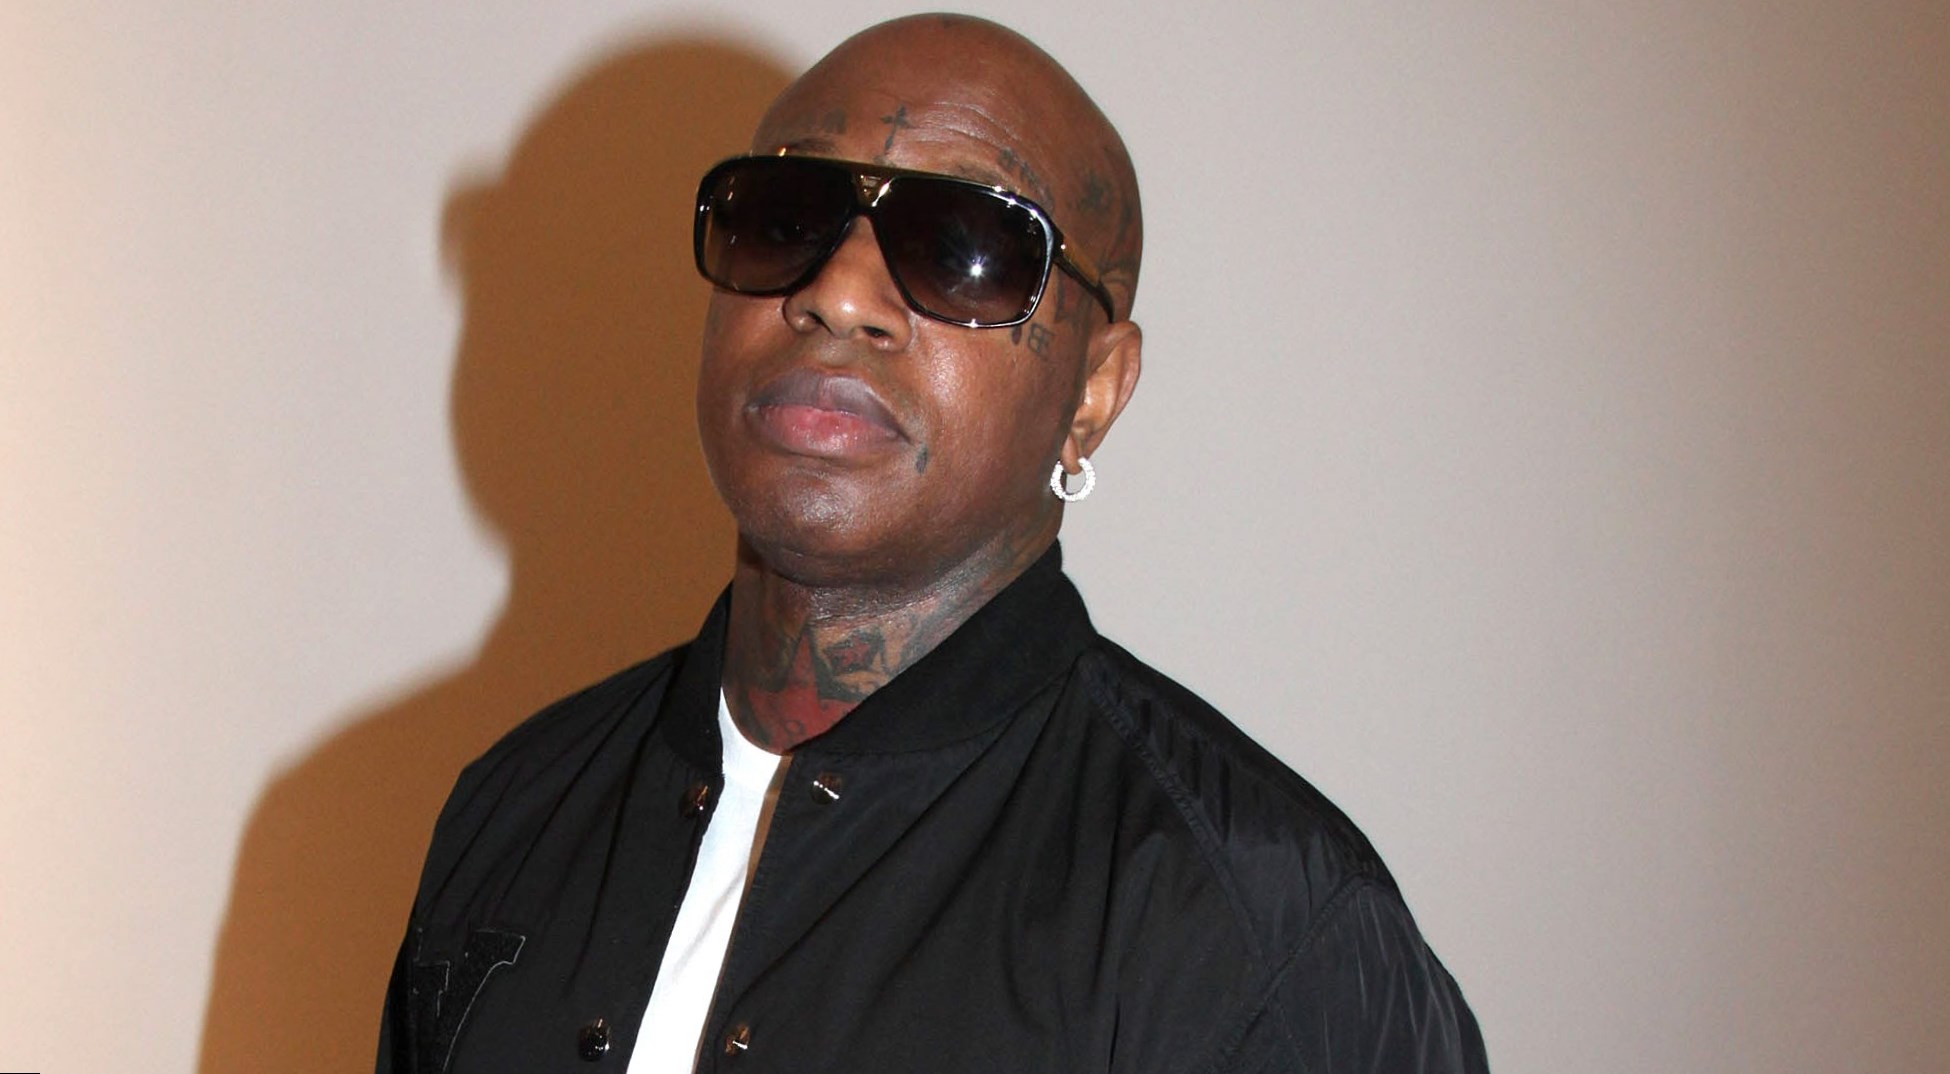 Birdman Height, Weight, Age and Body Measurements